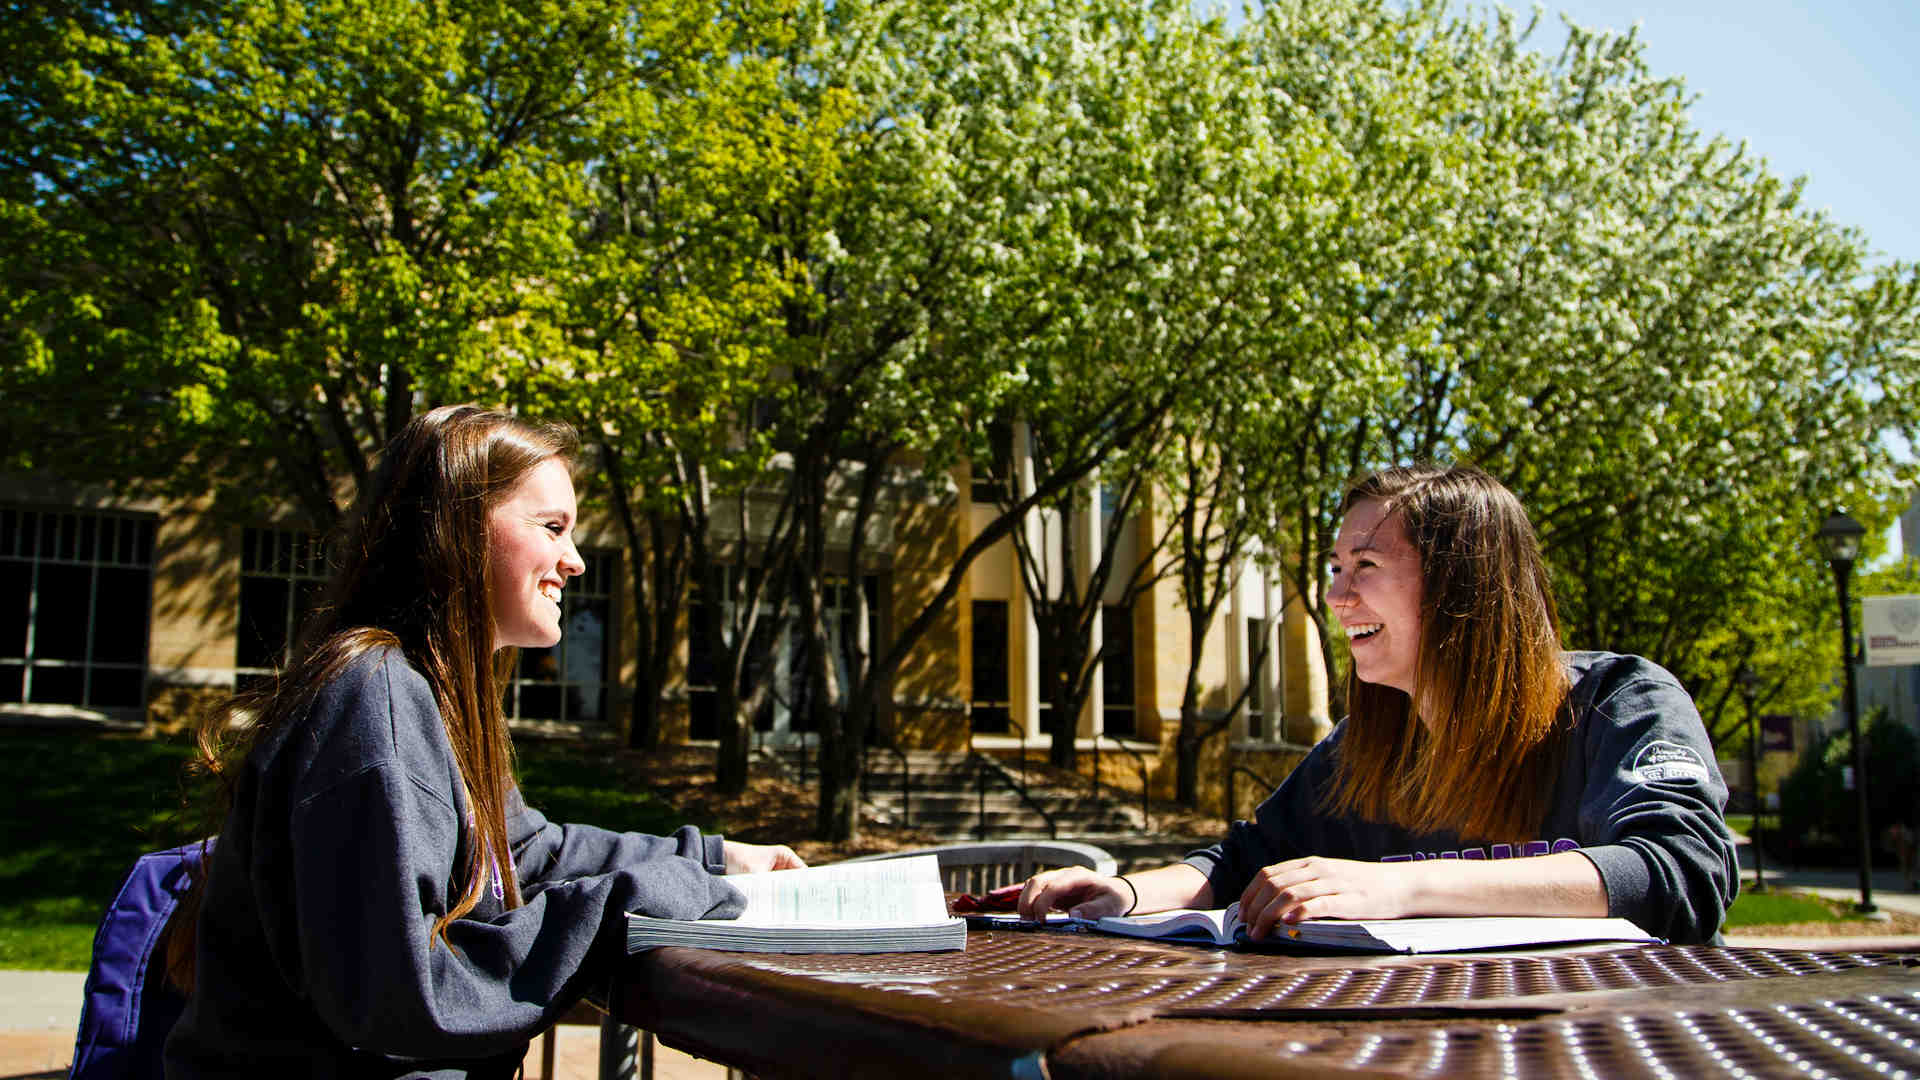 Two students sit and chat at a picnic table on a sunny day.